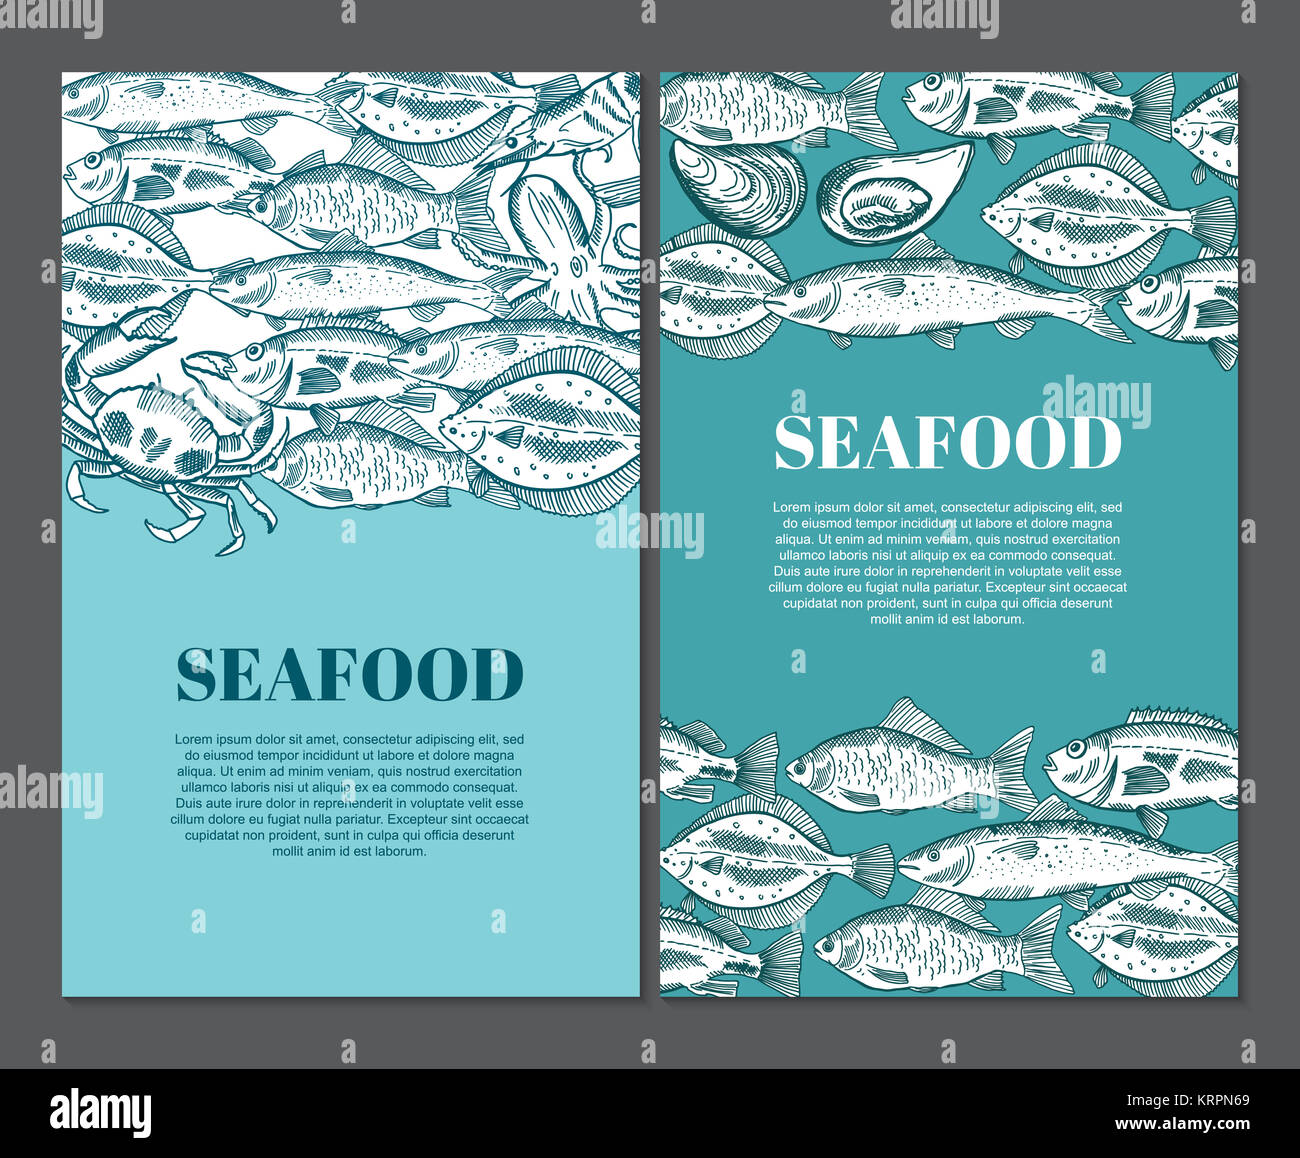 Hand drawing seafood illustrations for restaurant menus Stock Photo - Alamy